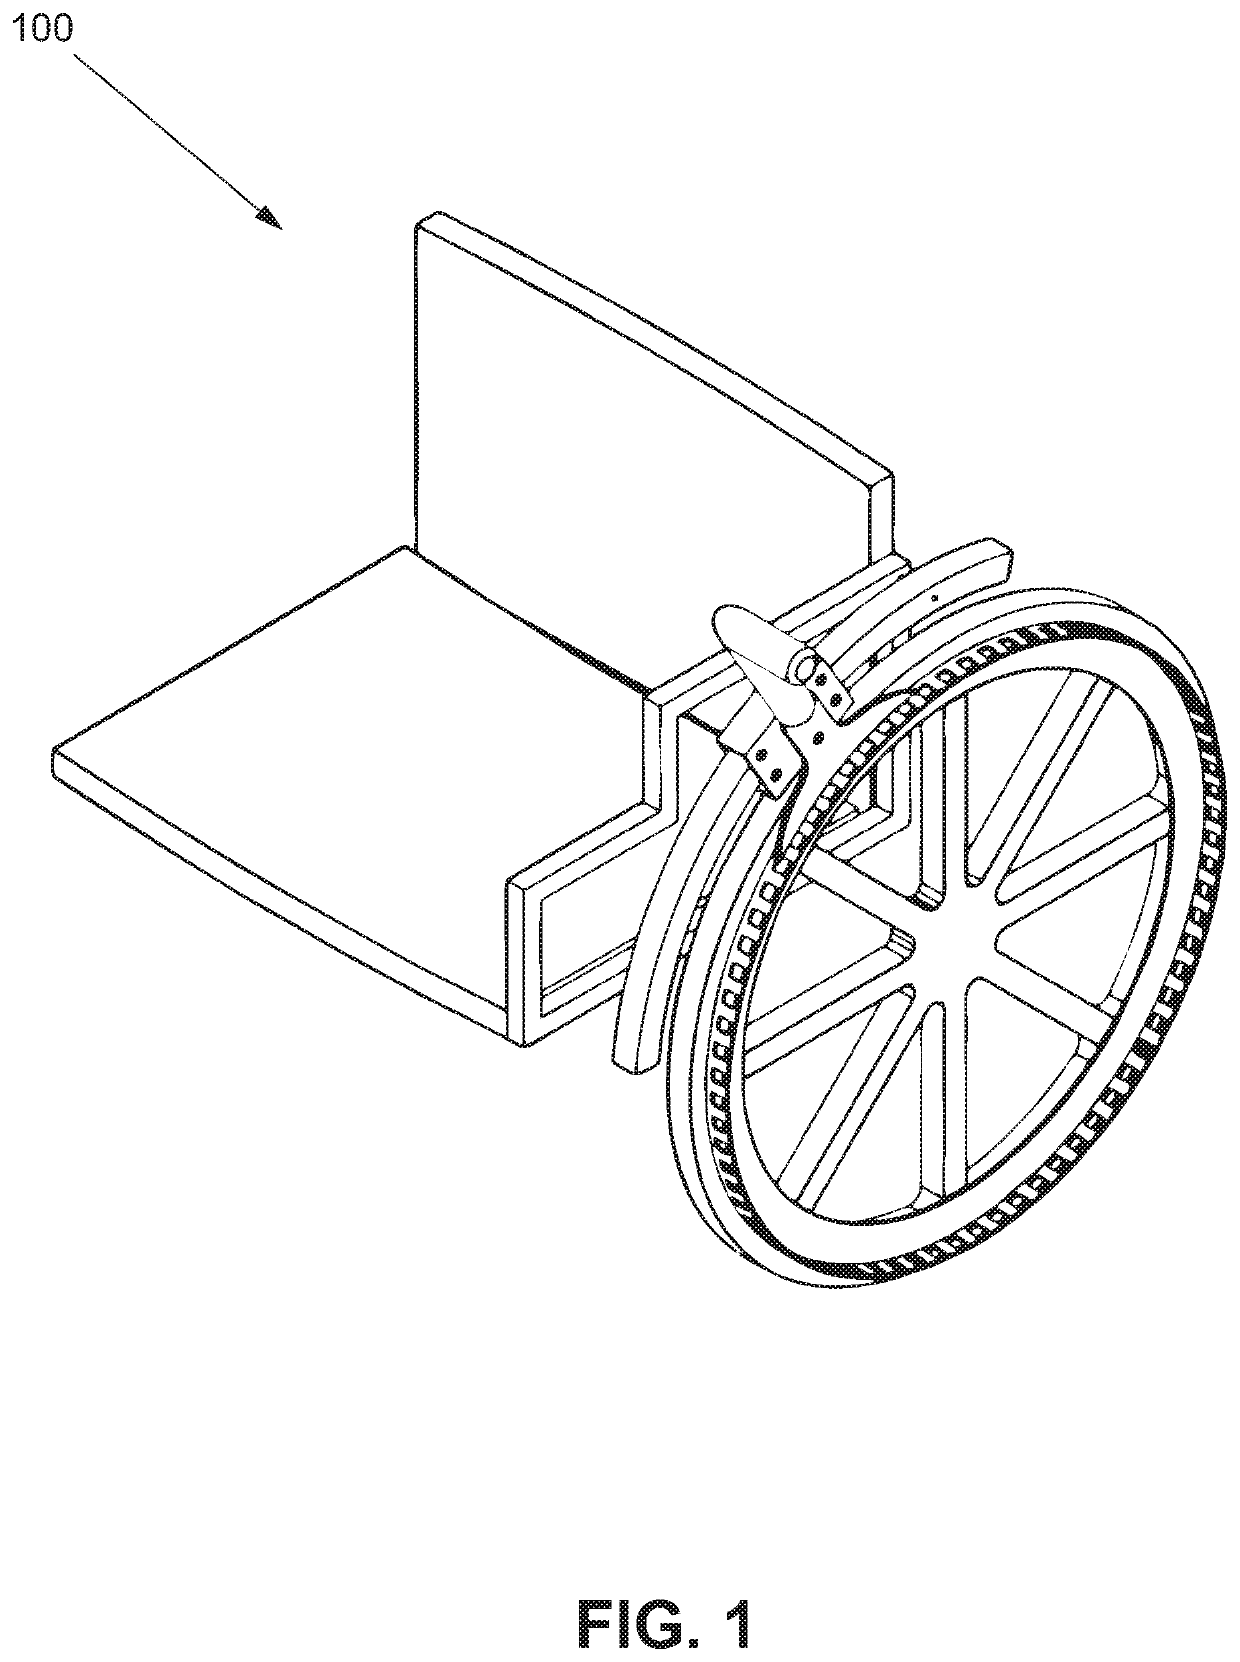 Wheelchair With Ratchet/Pawl Drive System